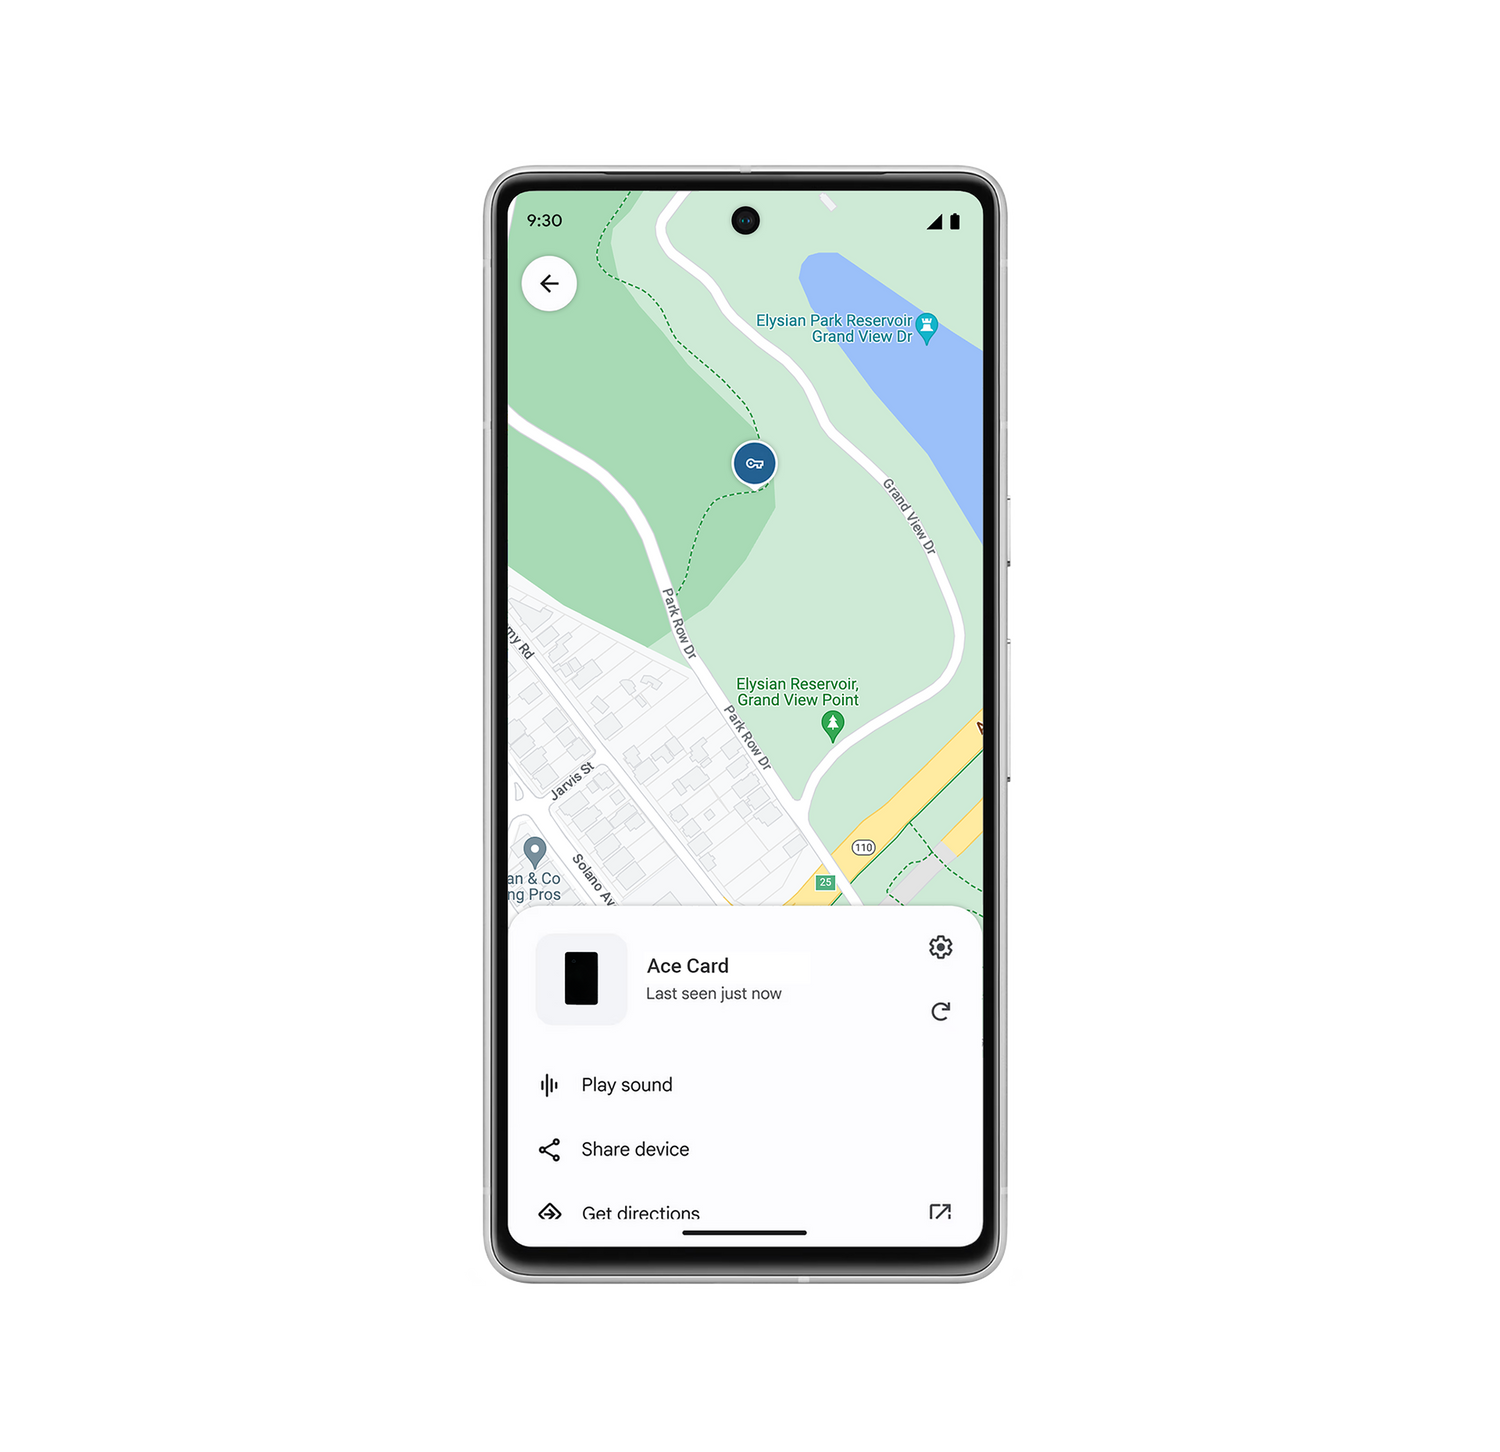 Google's Find My Device Expands to Utilize Billions of Android Devices for Enhanced Tracking